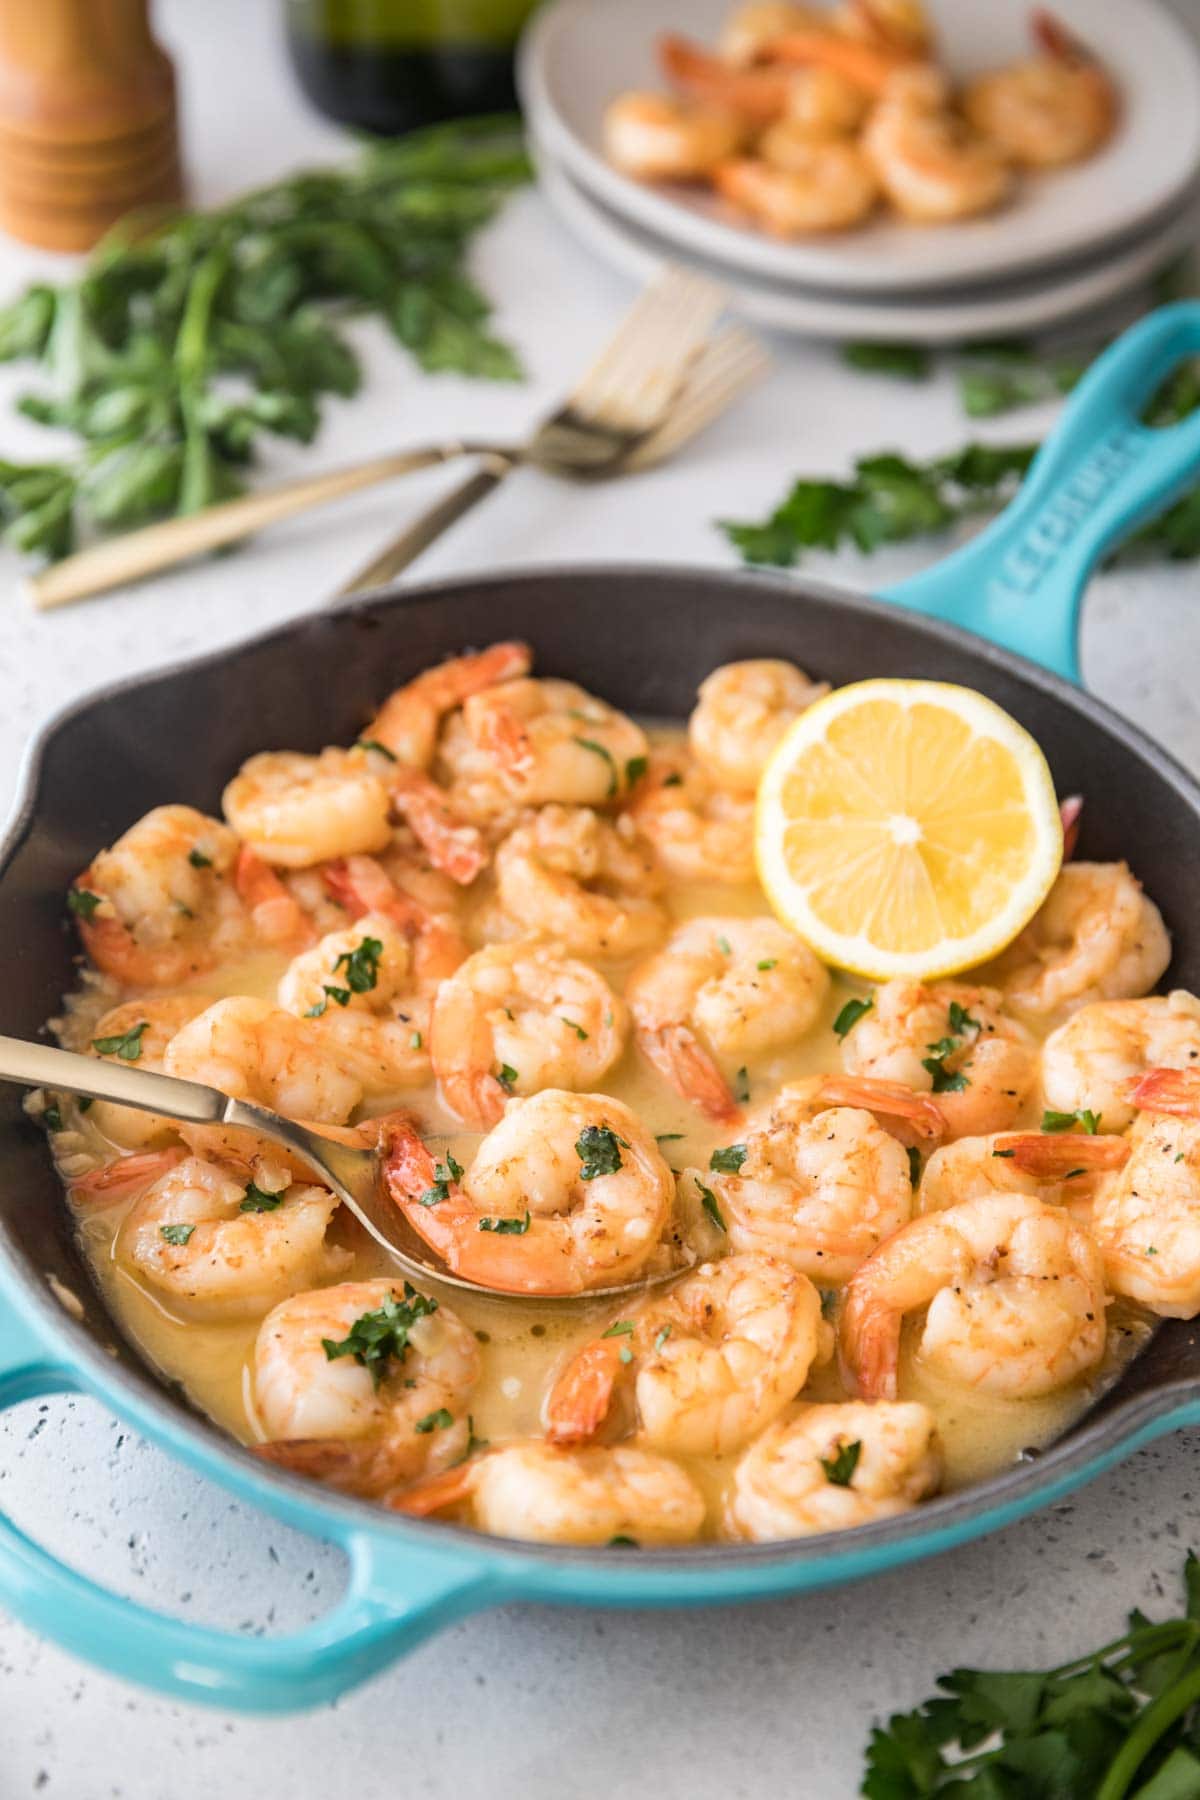 spoon scooping shrimp out of a skillet full of cooked shrimp topped with parsley and lemon